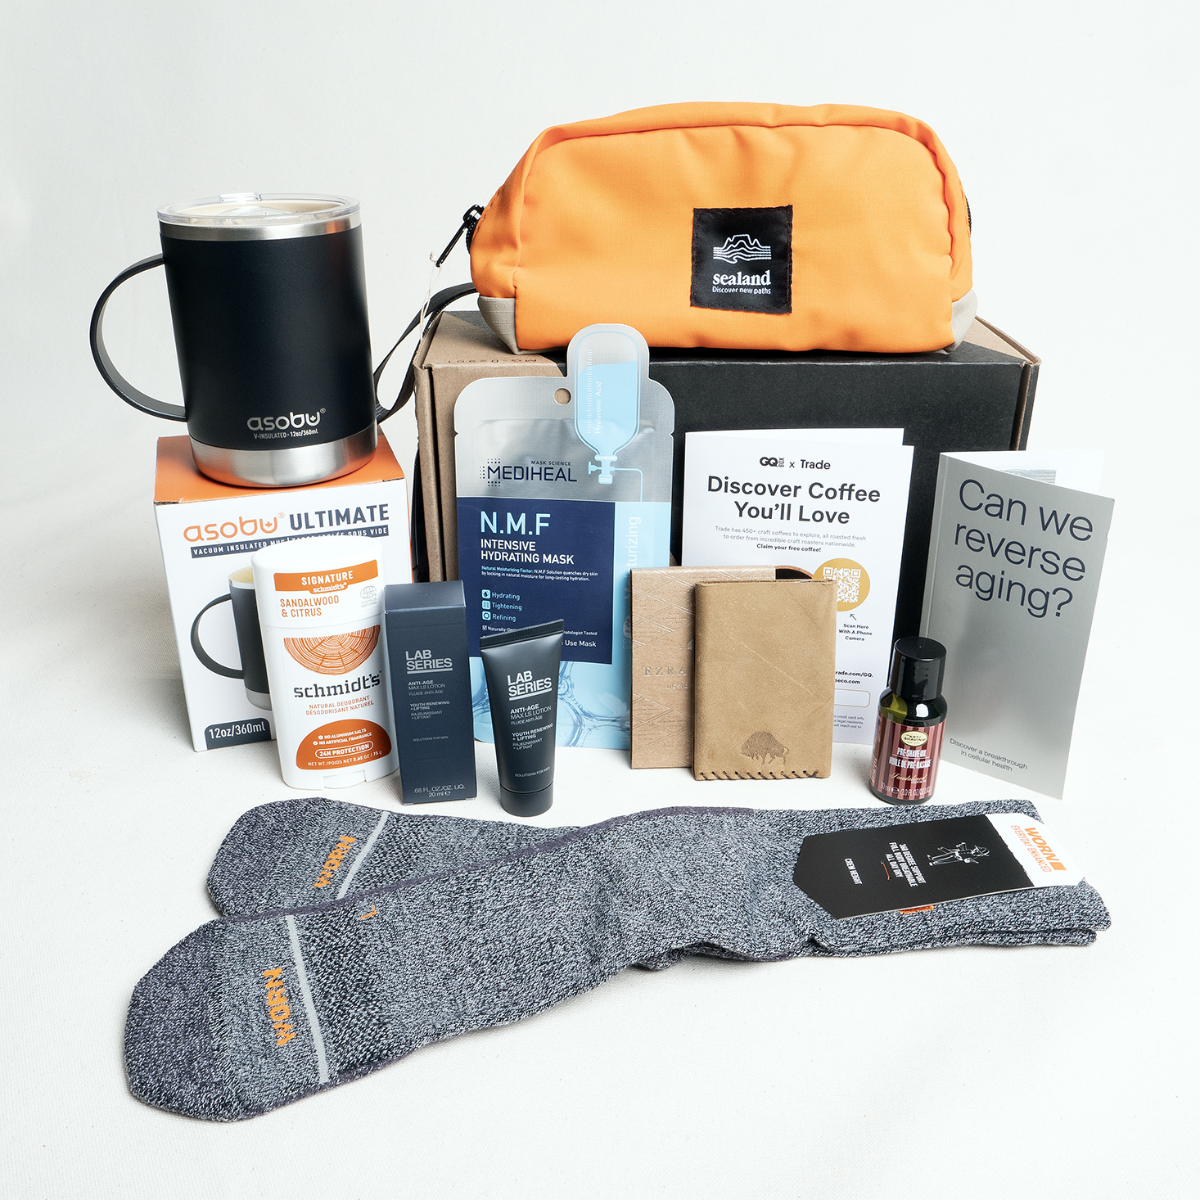 13. Unbox the Perfect Anniversary Gift for Him: A Tailored Subscription Box of His Interests